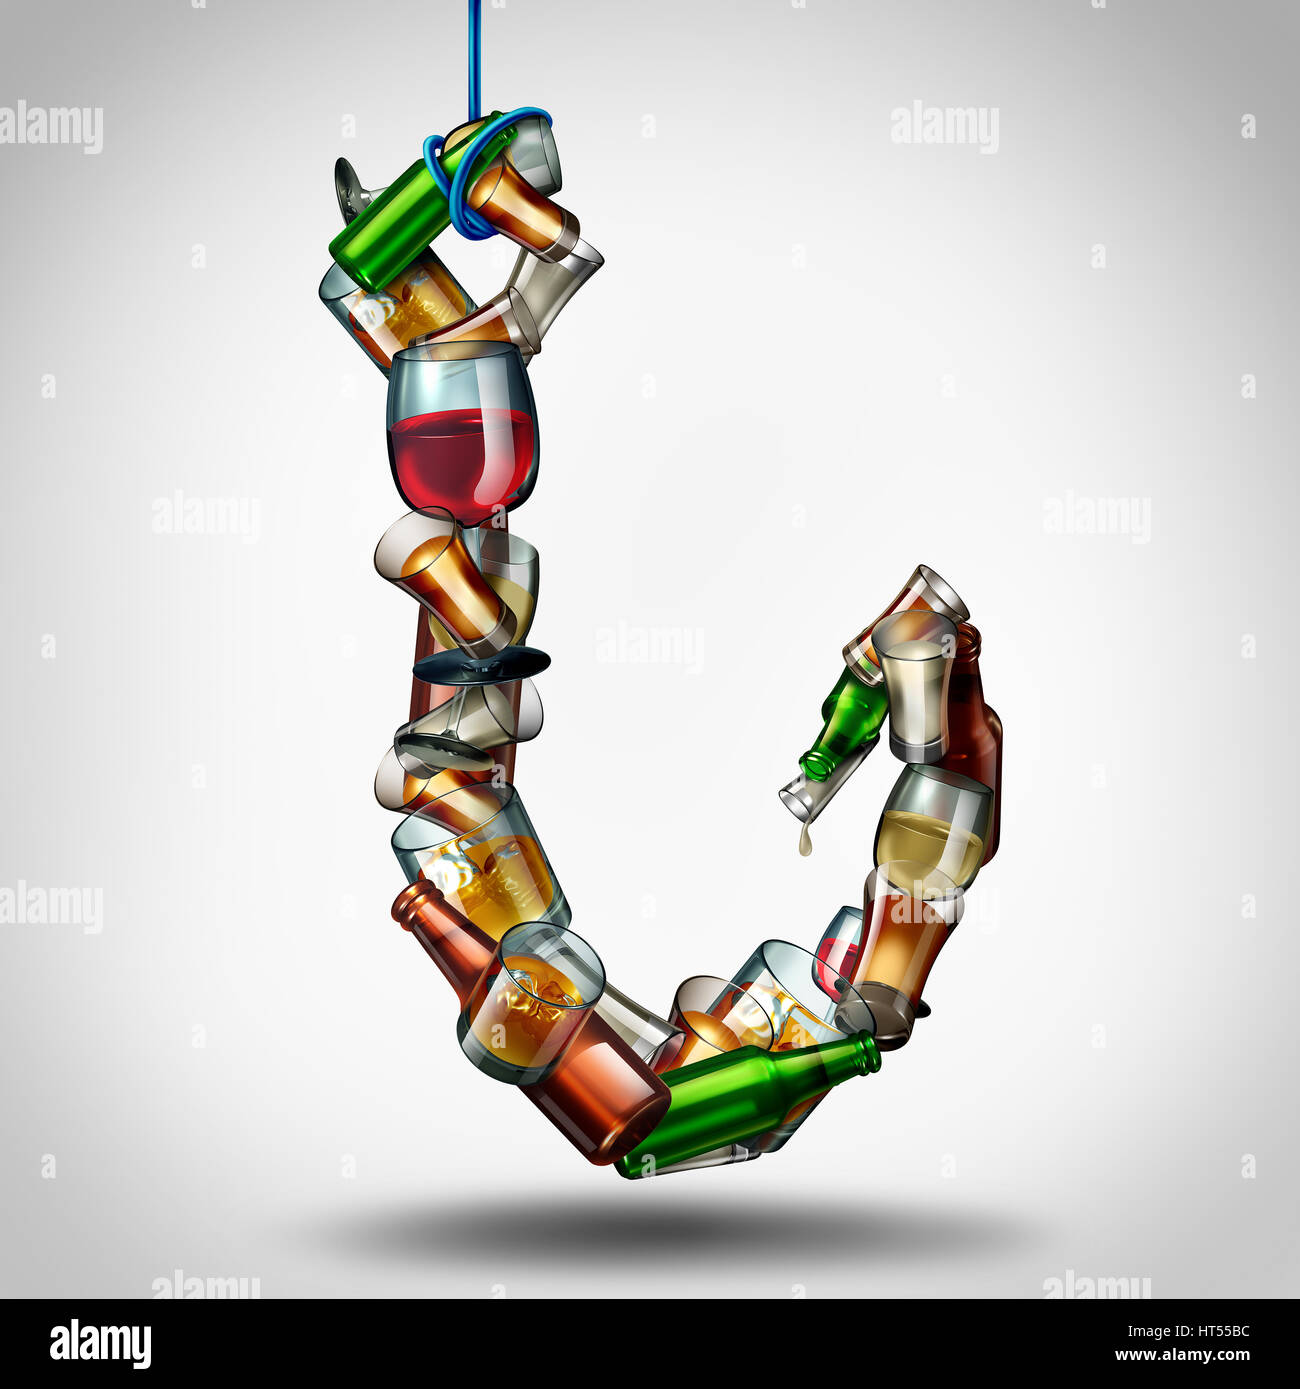 Alcohol hook and under the influence of alcoholic drinks as a group of bottles and glasses shaped as a fishing lure as a health and medical risk. Stock Photo